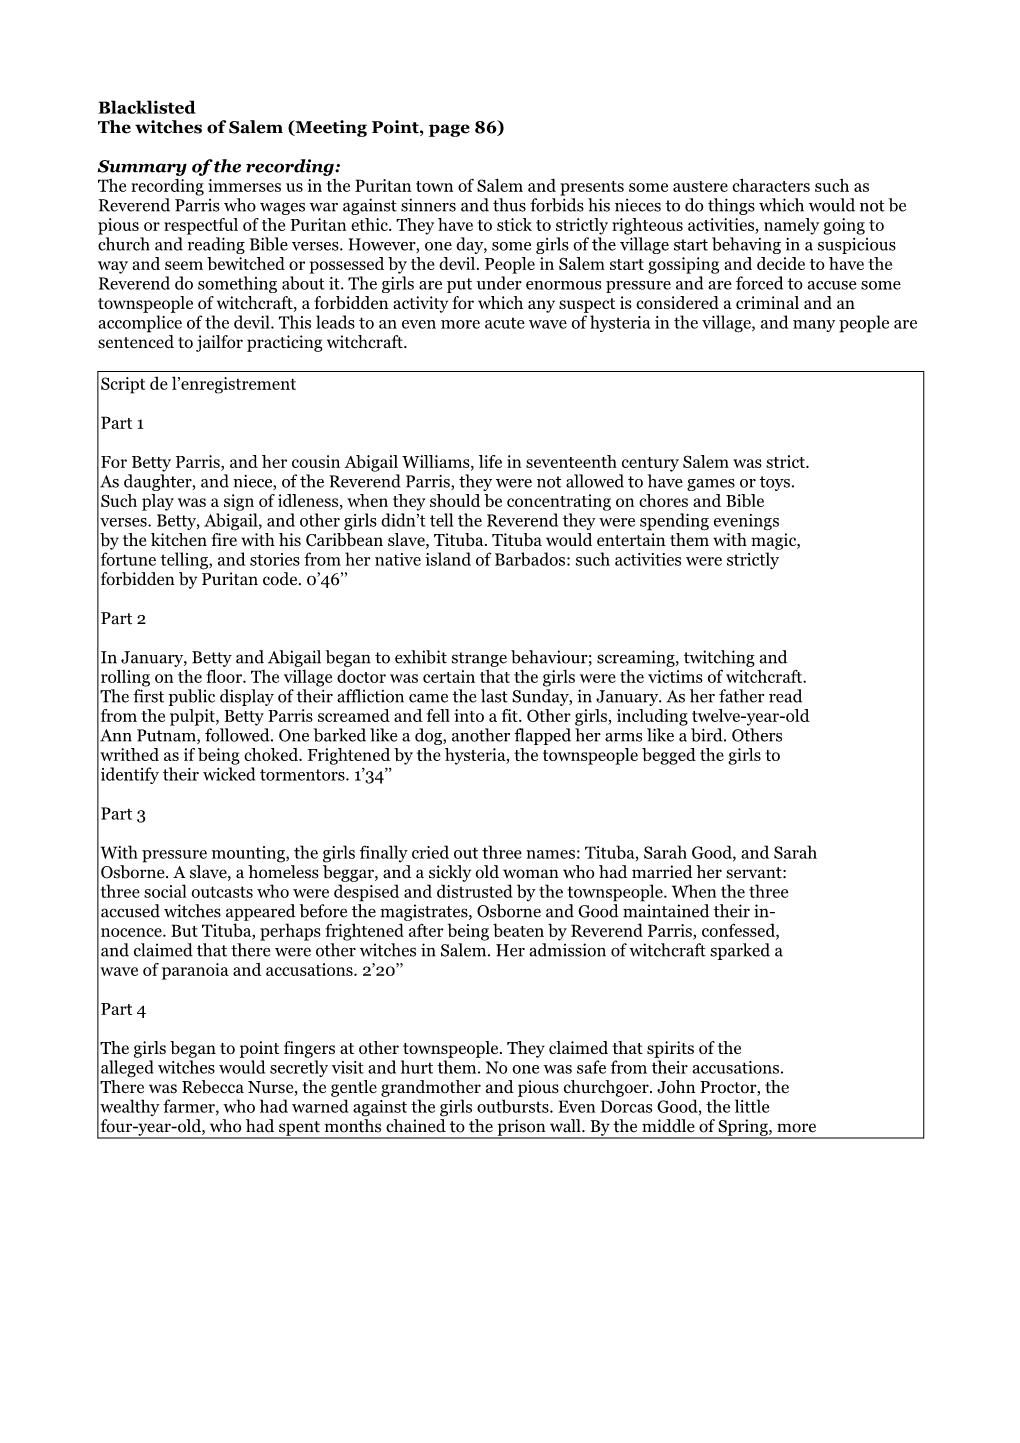 Blacklisted the Witches of Salem (Meeting Point, Page 86) Summary of the Recording: the Recording Immerses Us in the Puritan